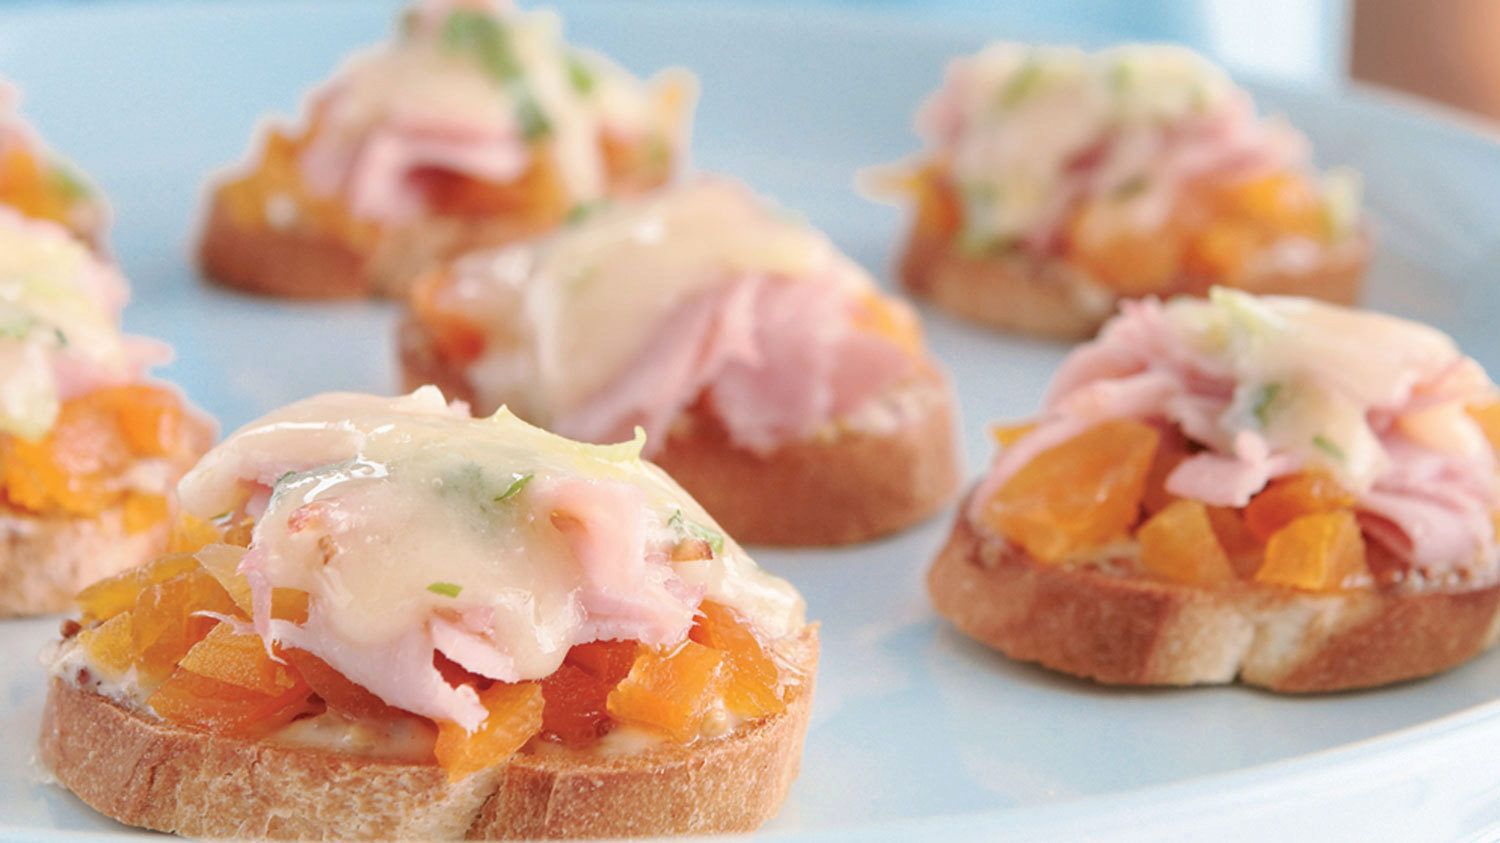 Read more about Cheesy Ham & Apricot Toasts